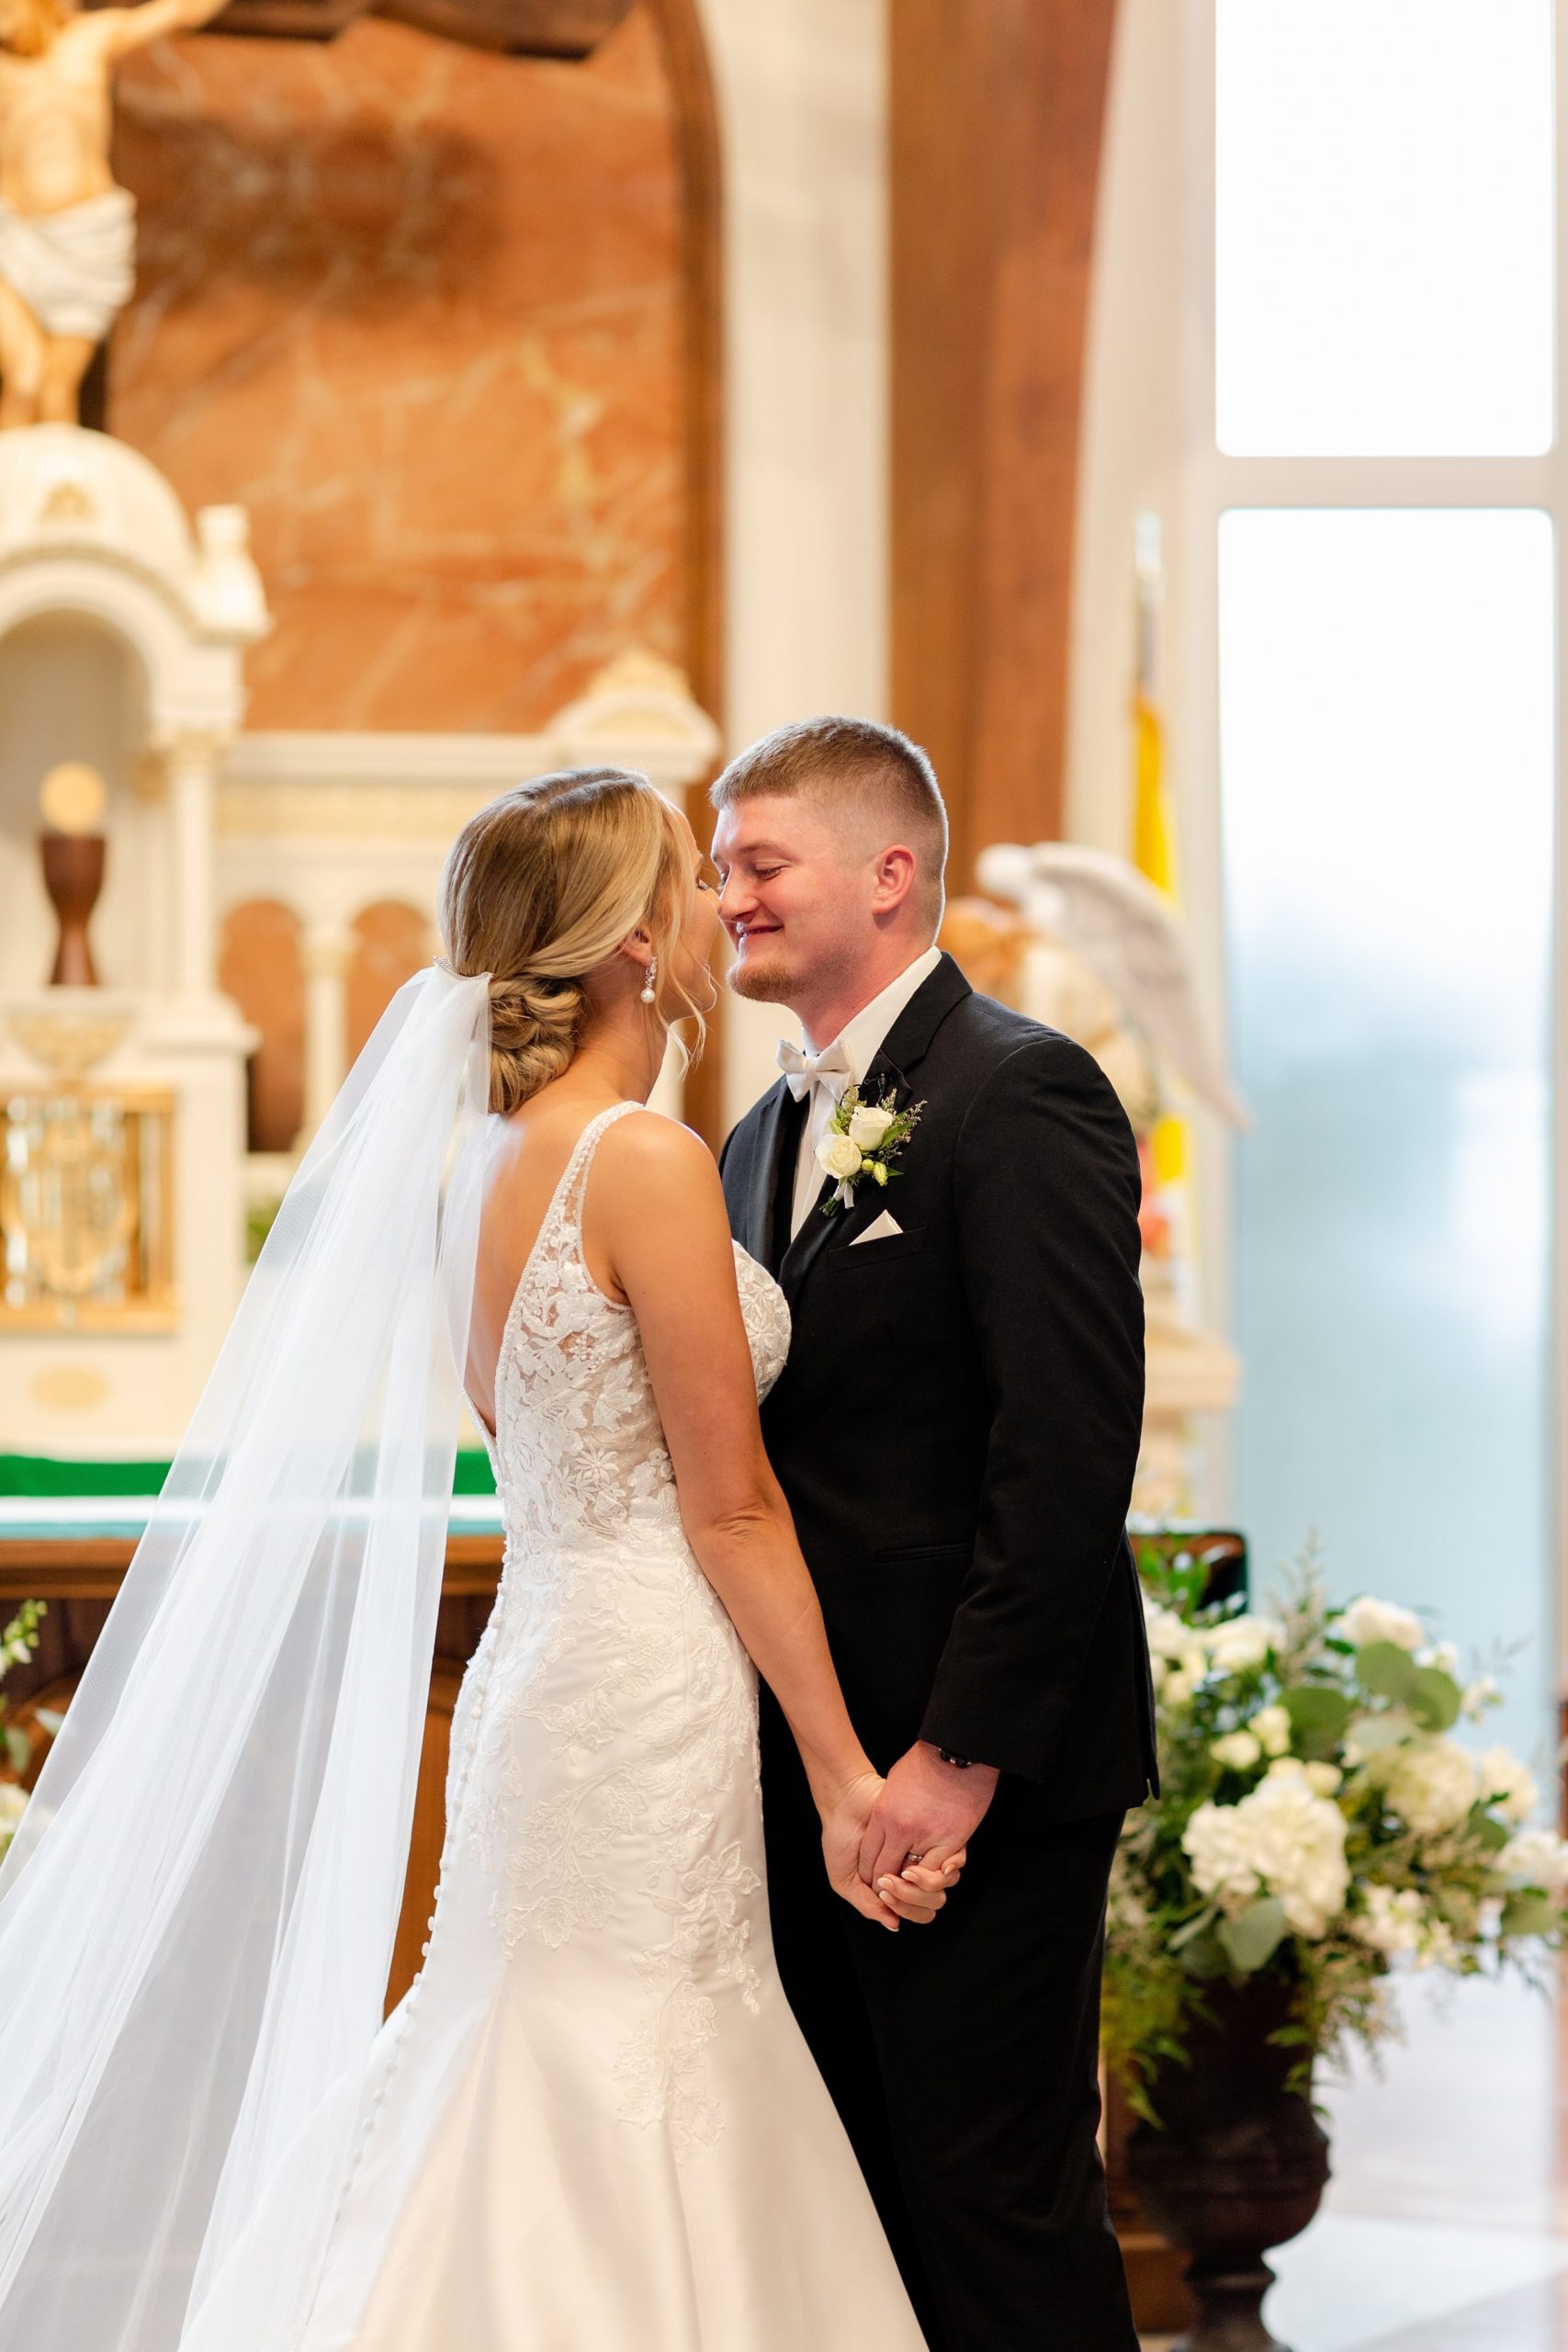 Hannah and Cody's Wedding in Booneville, IN152.jpg